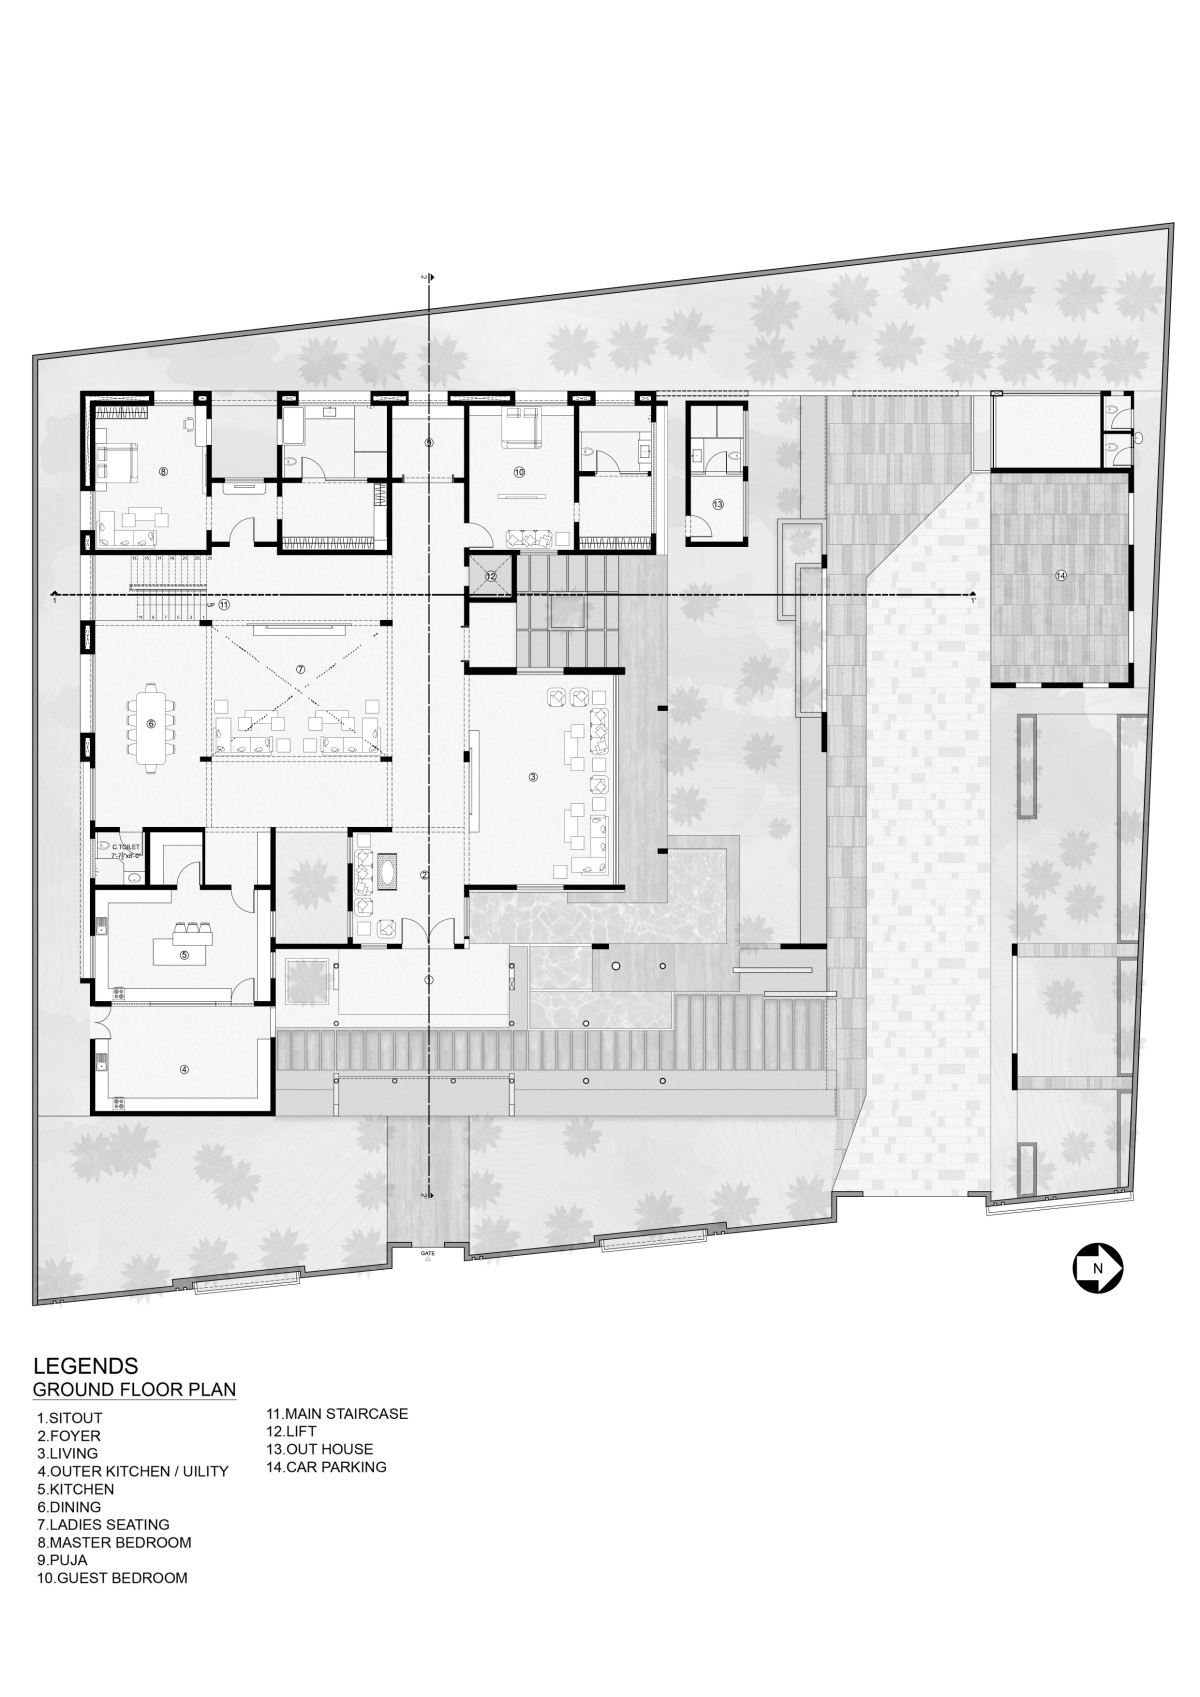 Ground floor plan of The N-Cube Villa by Cubism Architects & Interiors